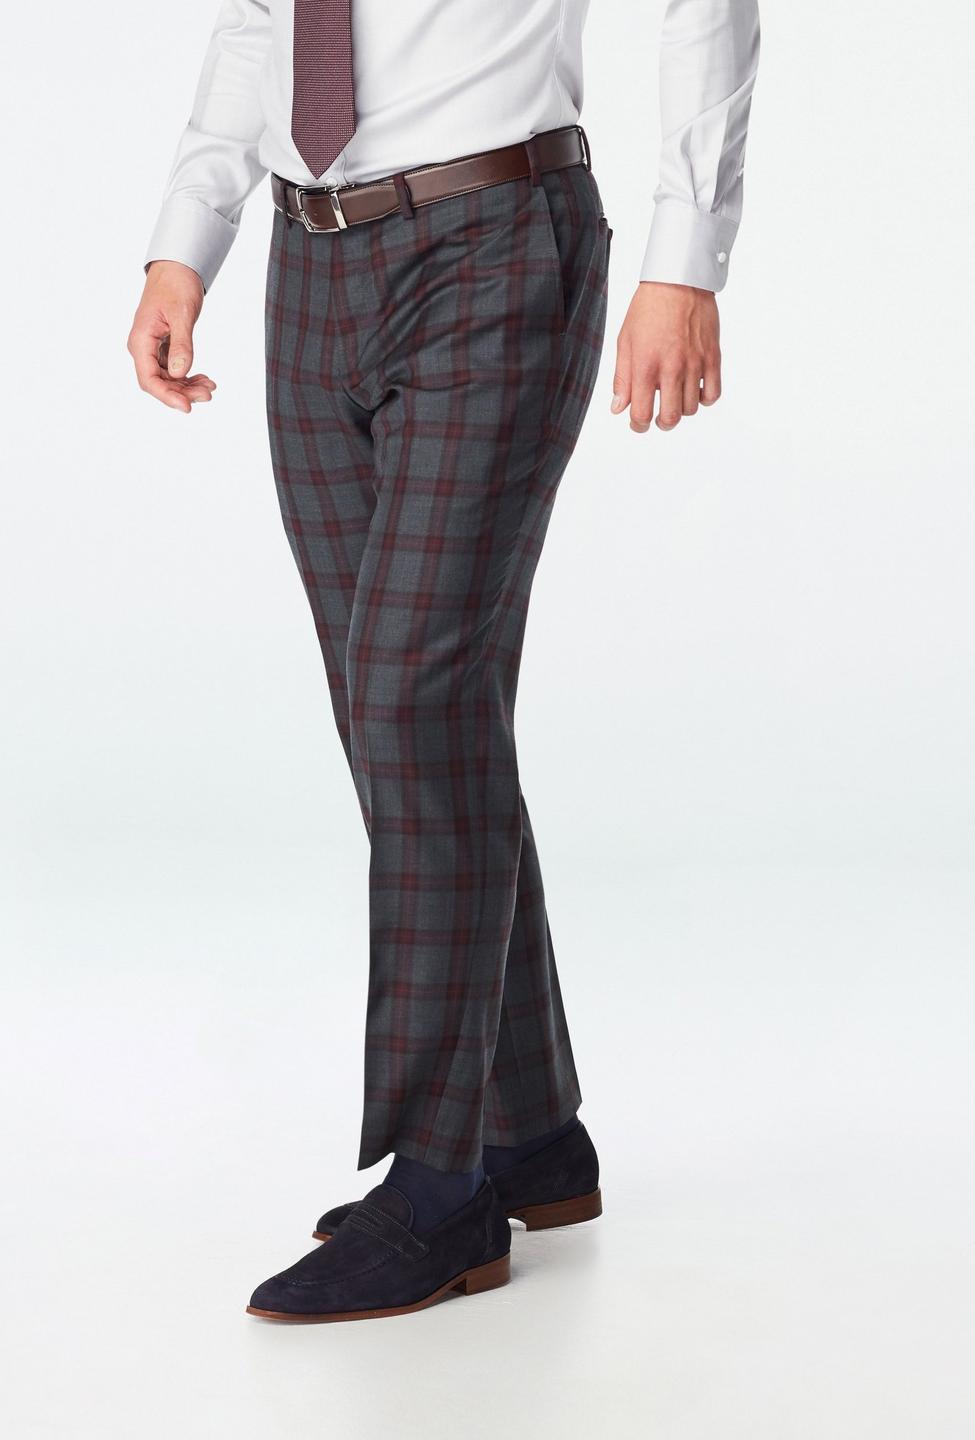 Gray pants - Dursley Plaid Design from Seasonal Indochino Collection